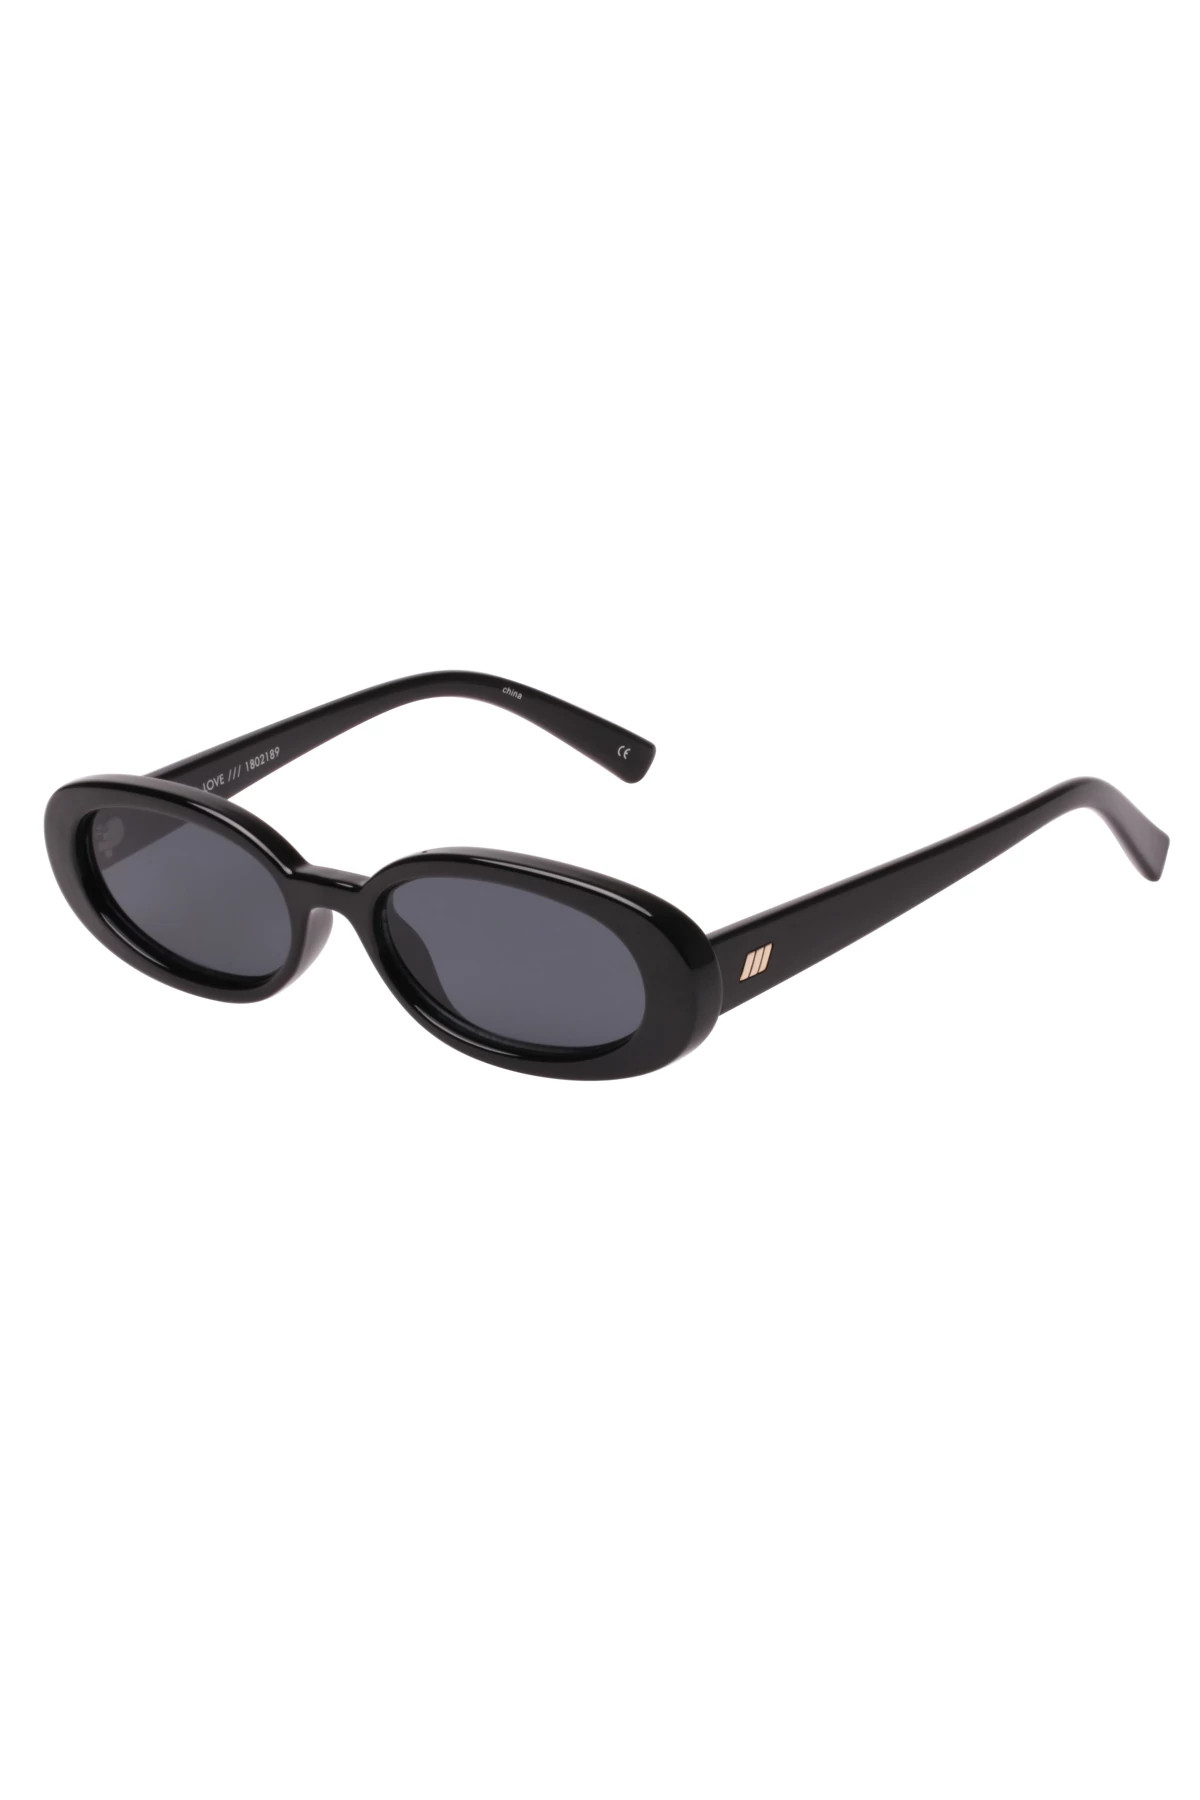 BLACK Outta Love Oval Sunglasses image number 1